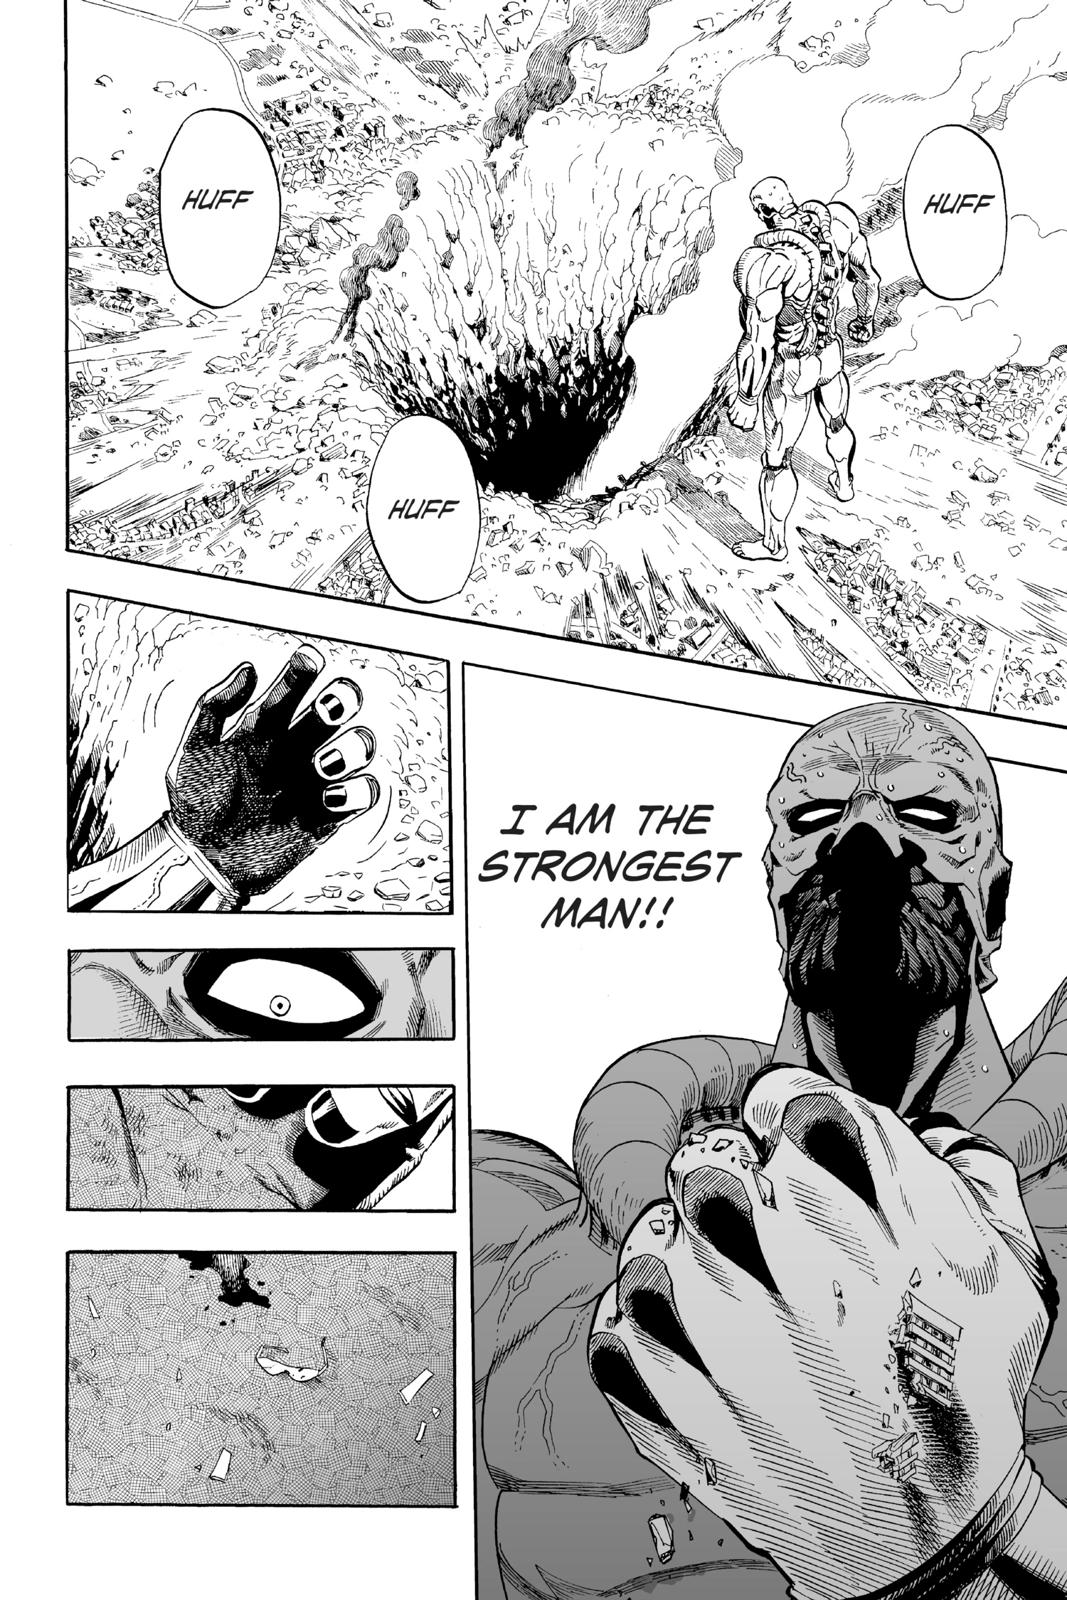 One-Punch Man, Punch 3 image 16